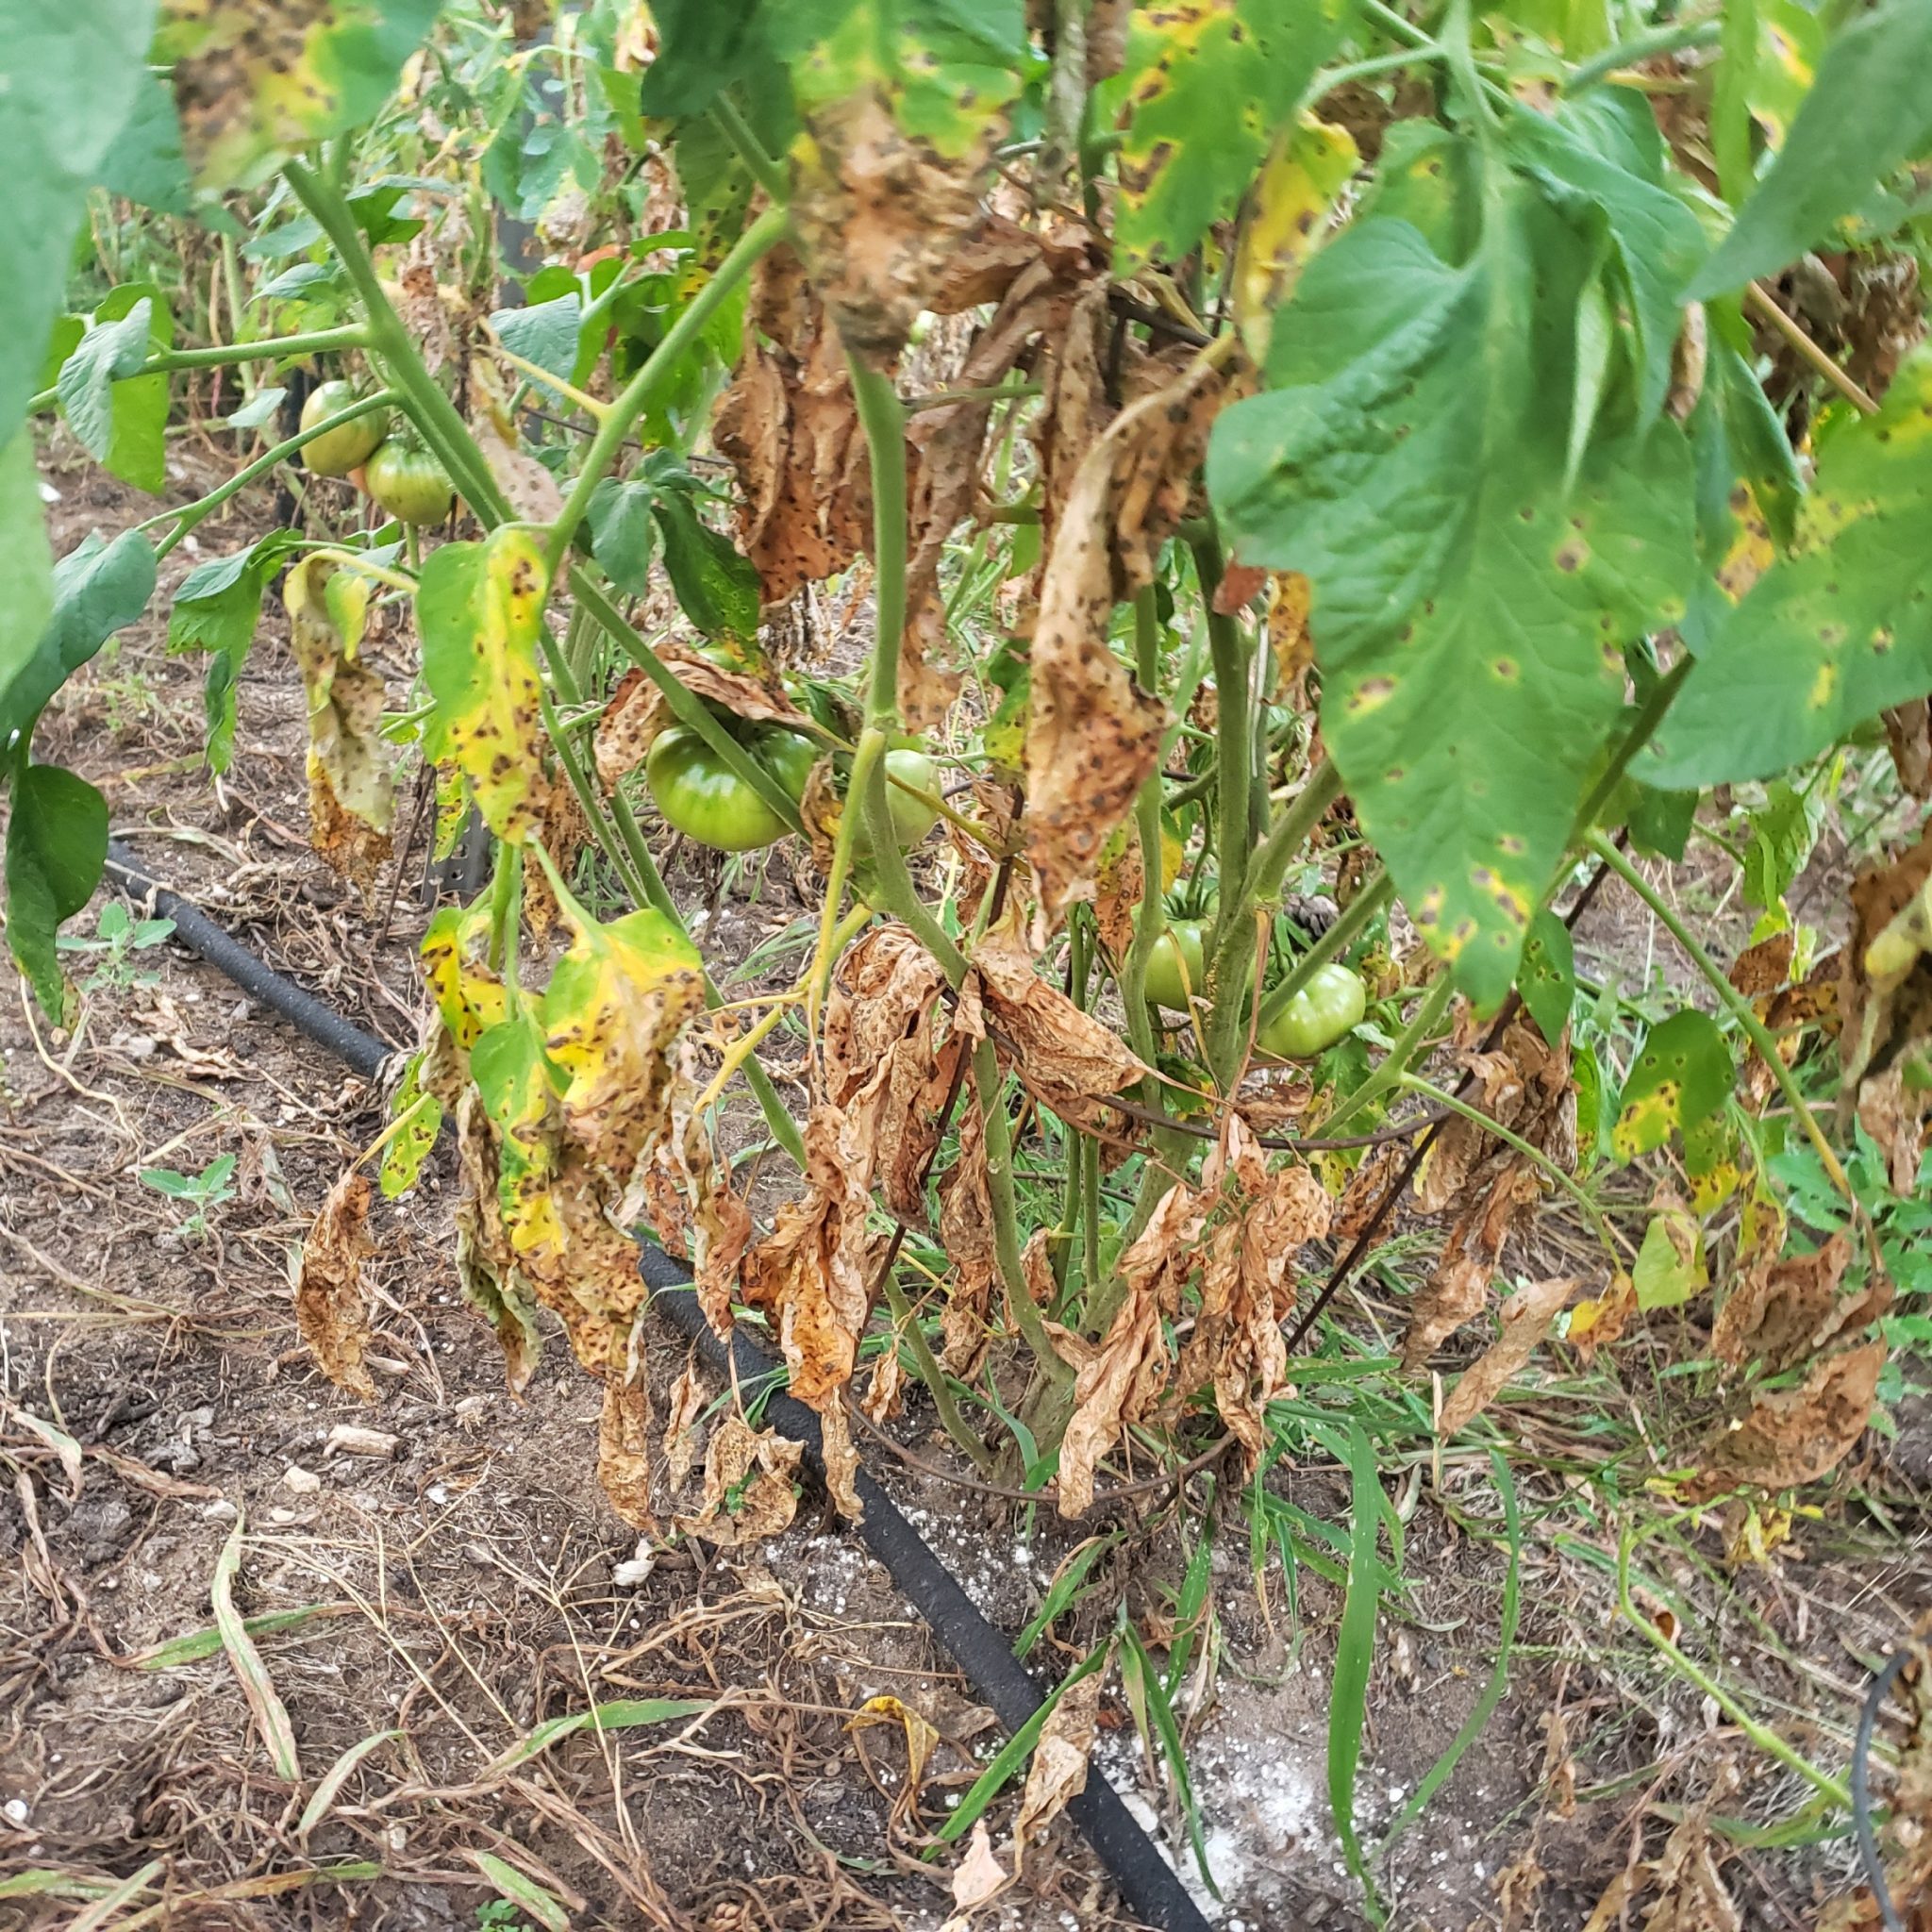 early tomato blight treatment after first sign of infection